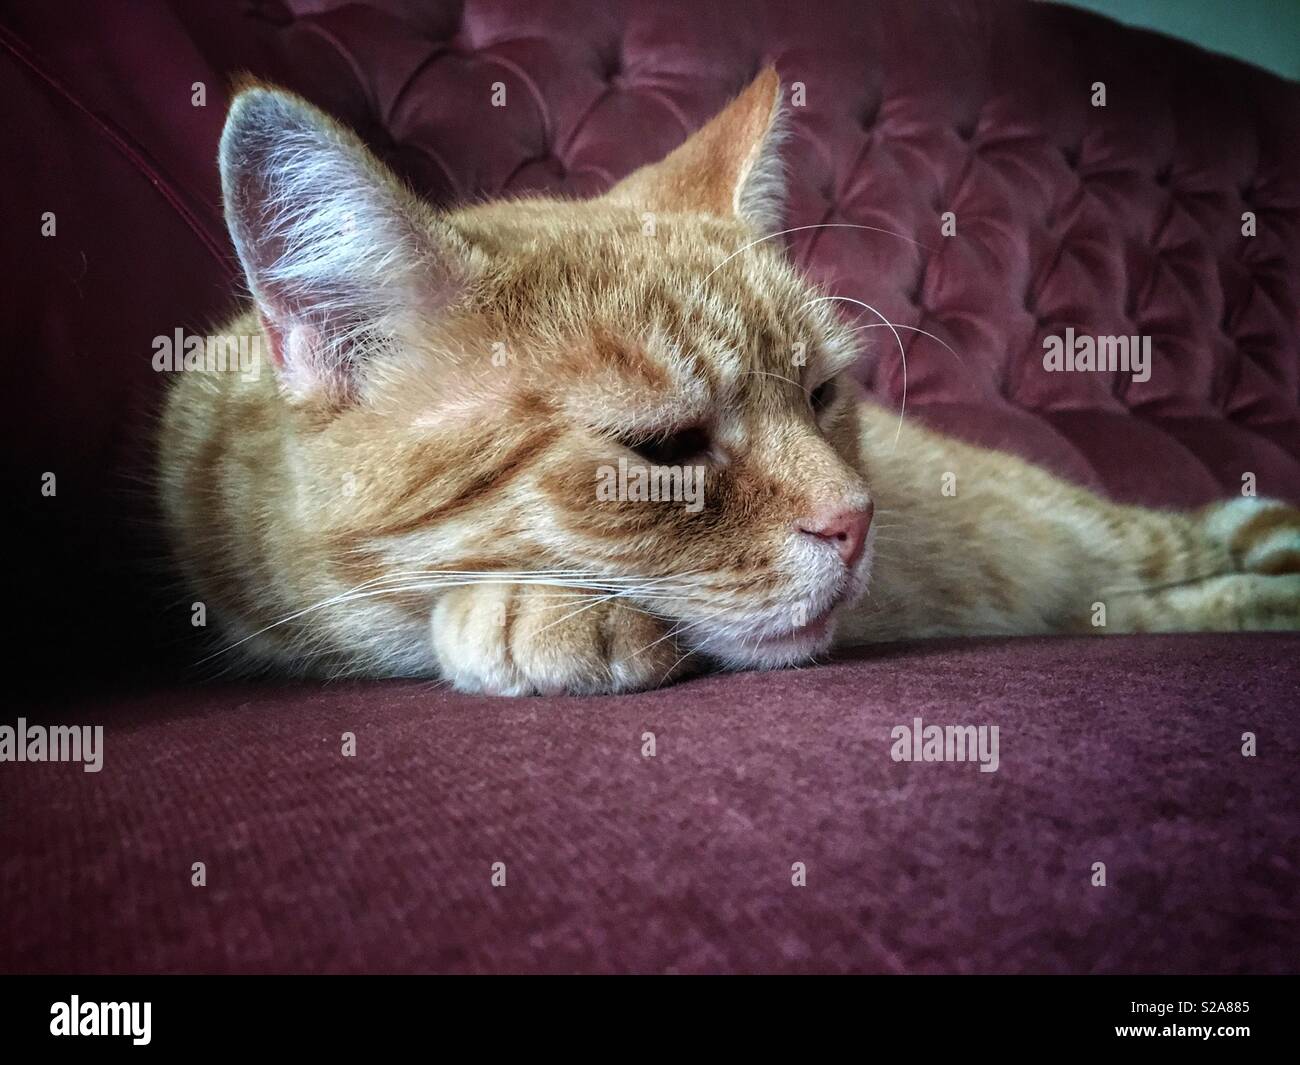 Cute ginger cat resting on sofa Stock Photo